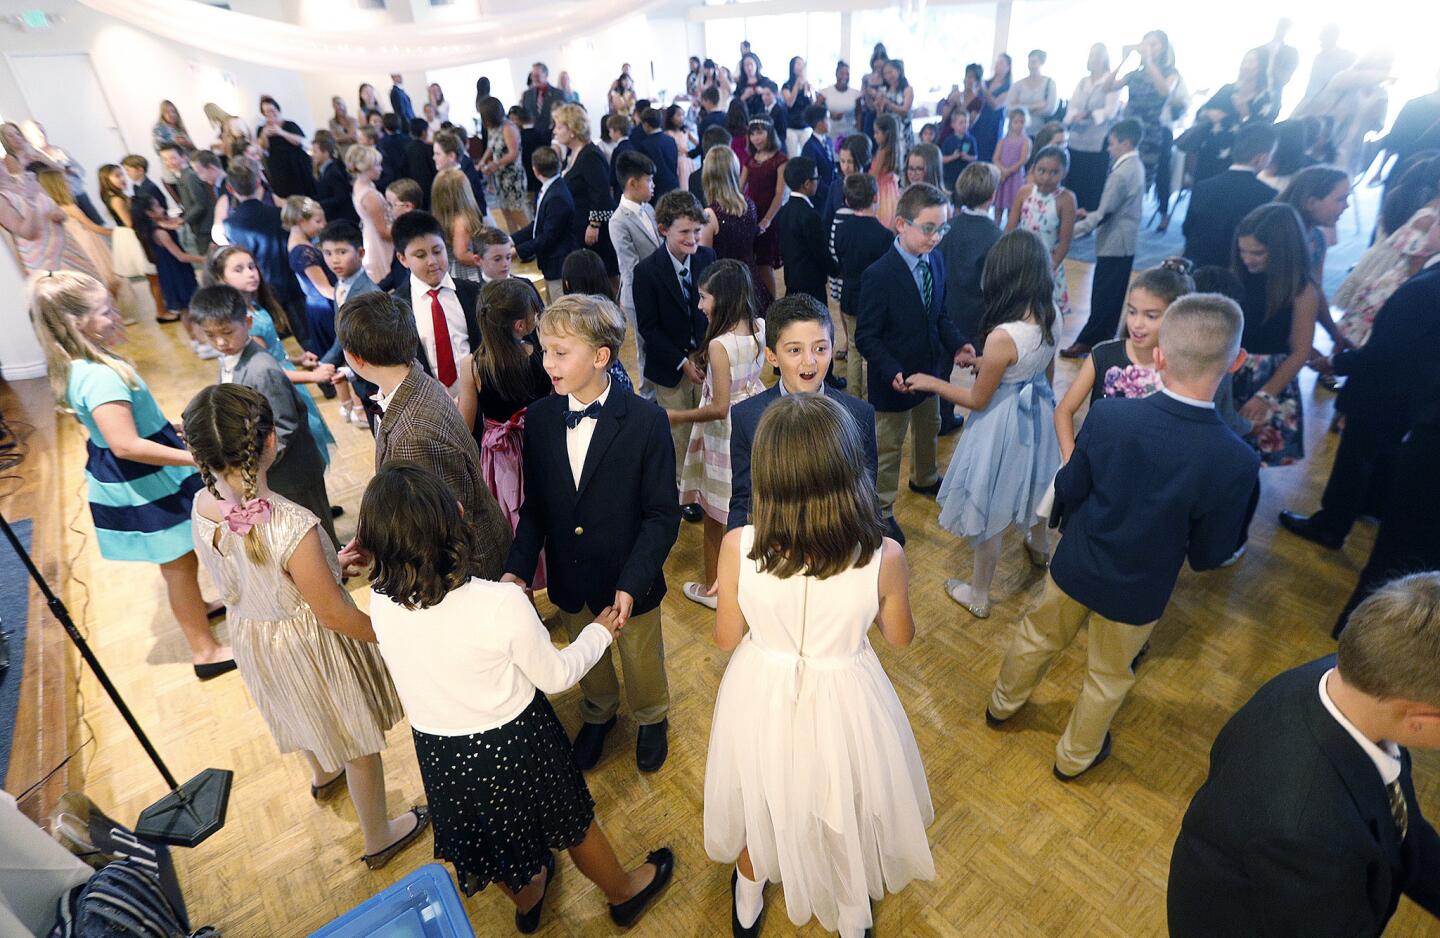 Photo Gallery: Basic etiquette cotillion class taught to La Canada fourth graders